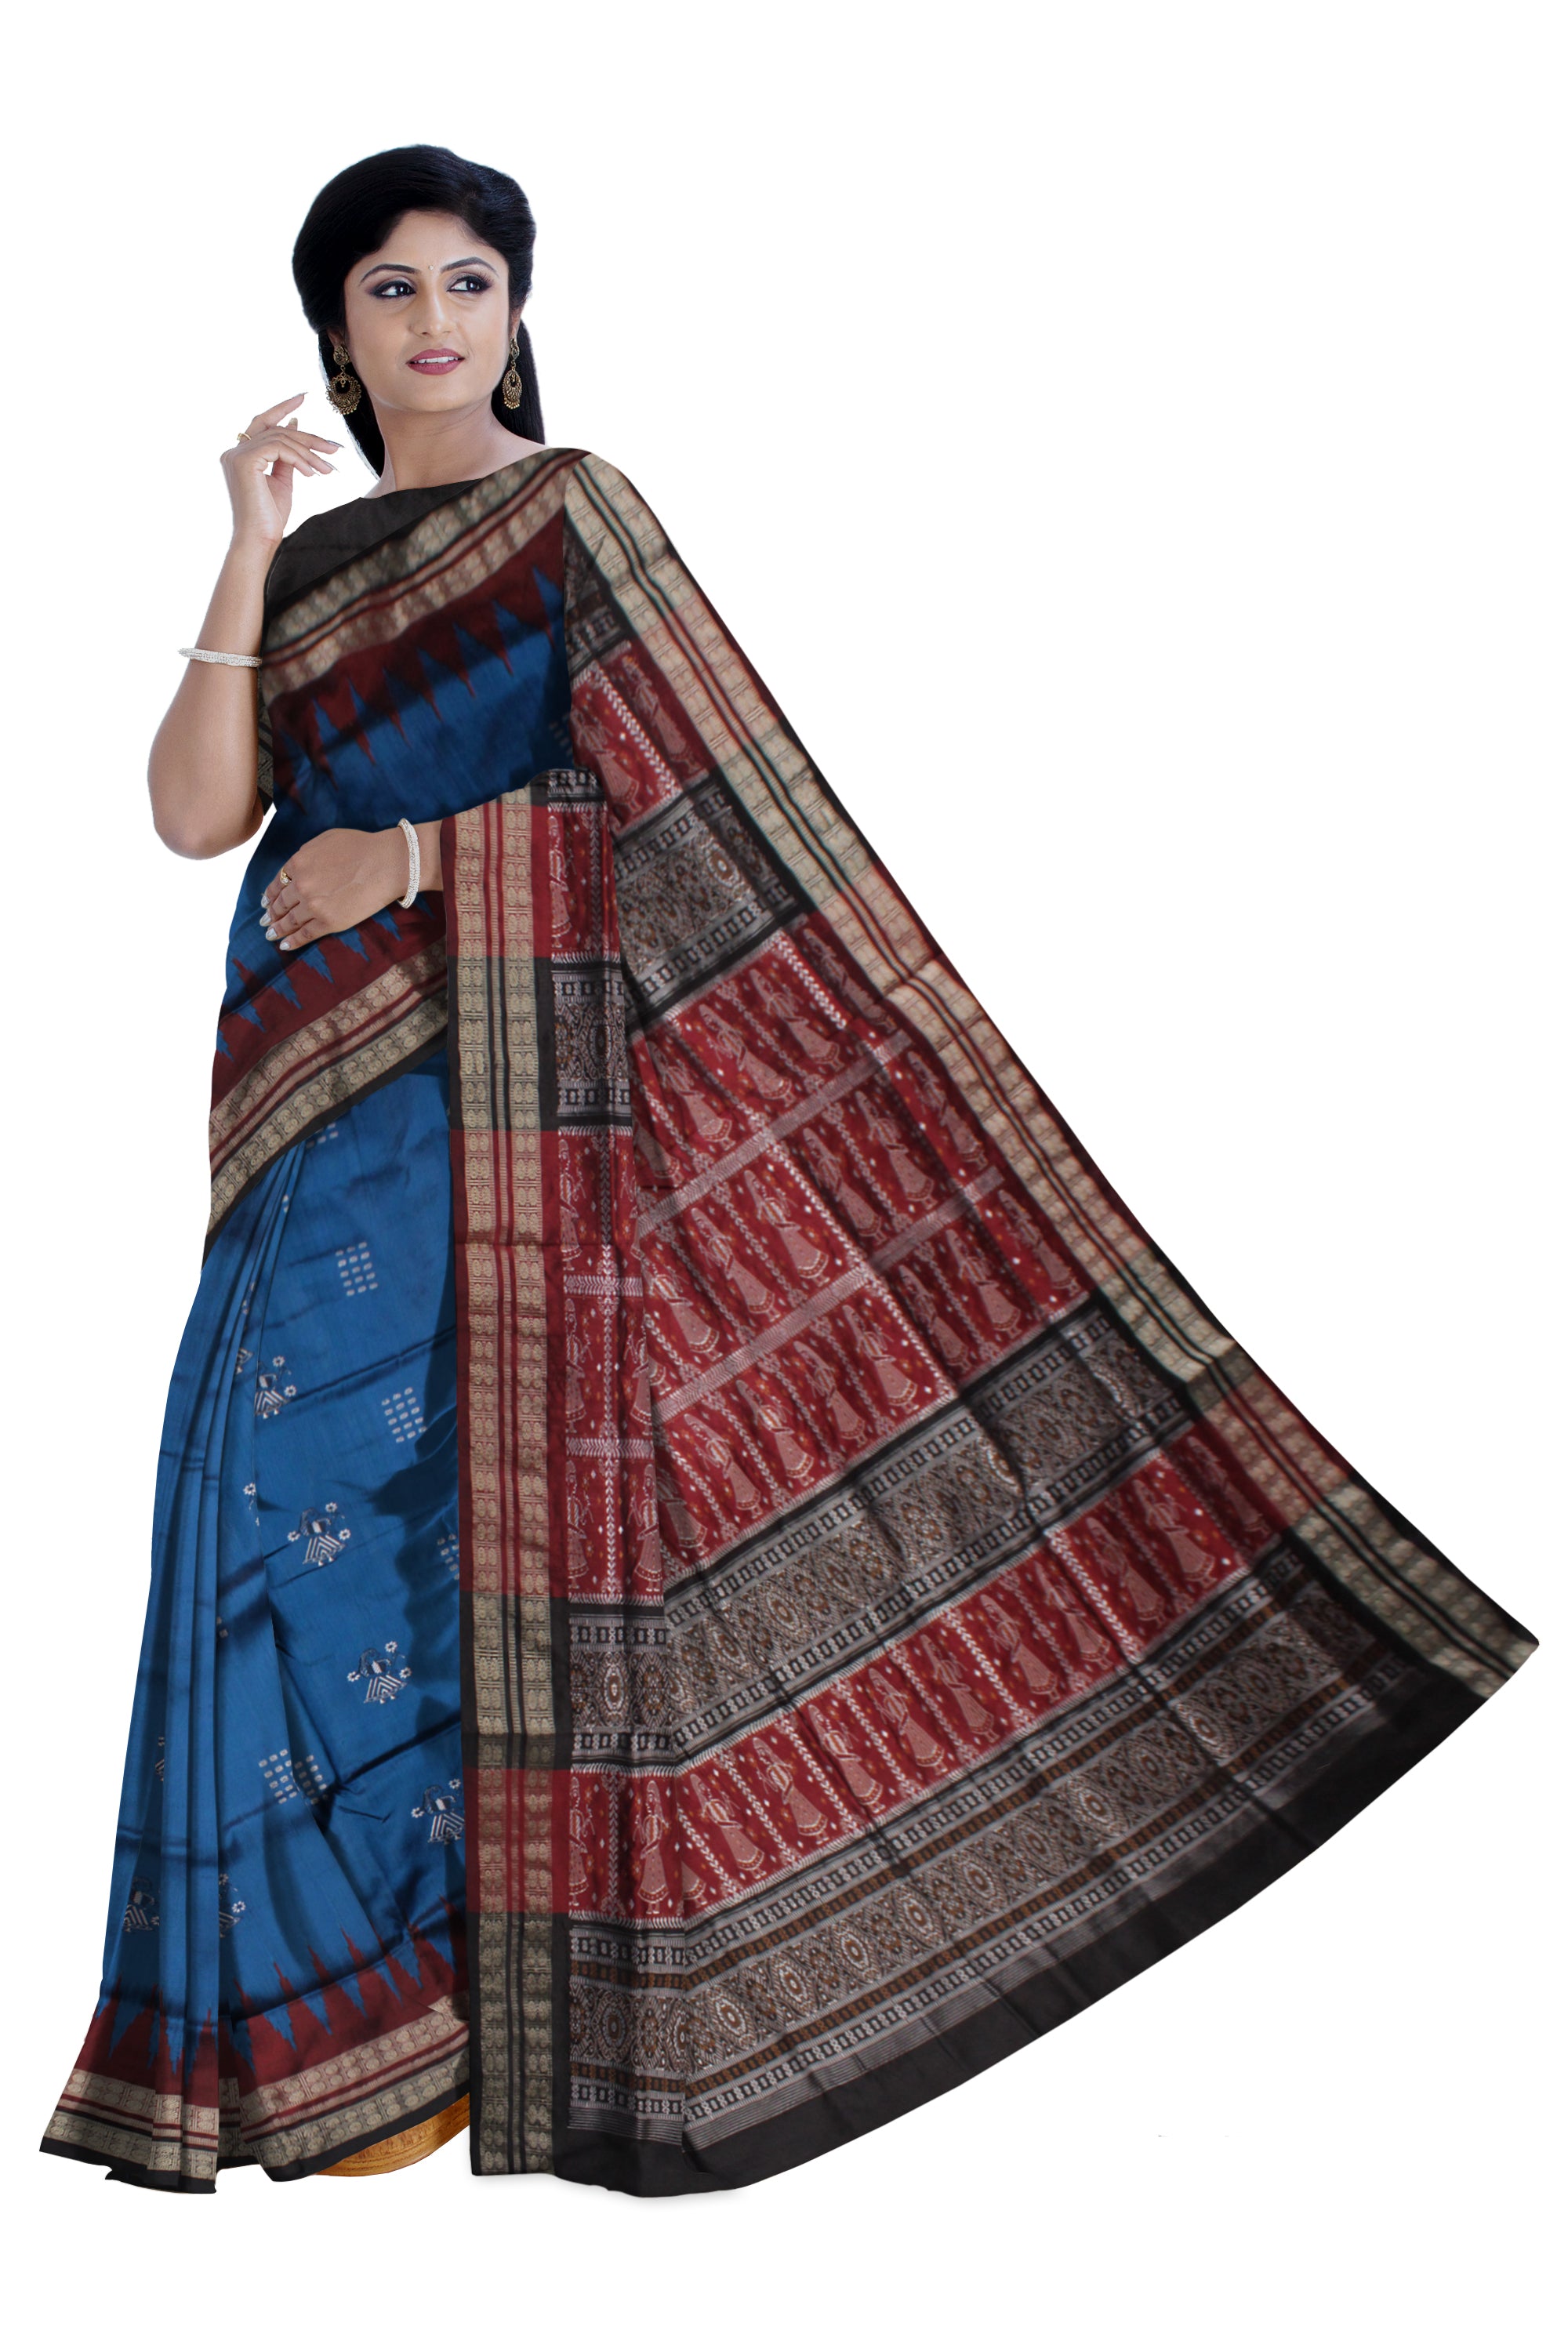 SY-BLUE,MAROON AND BLACK COLOR DOLL PATTERN PATA SAREE,WITH BLOUSE PIECE. - Koshali Arts & Crafts Enterprise